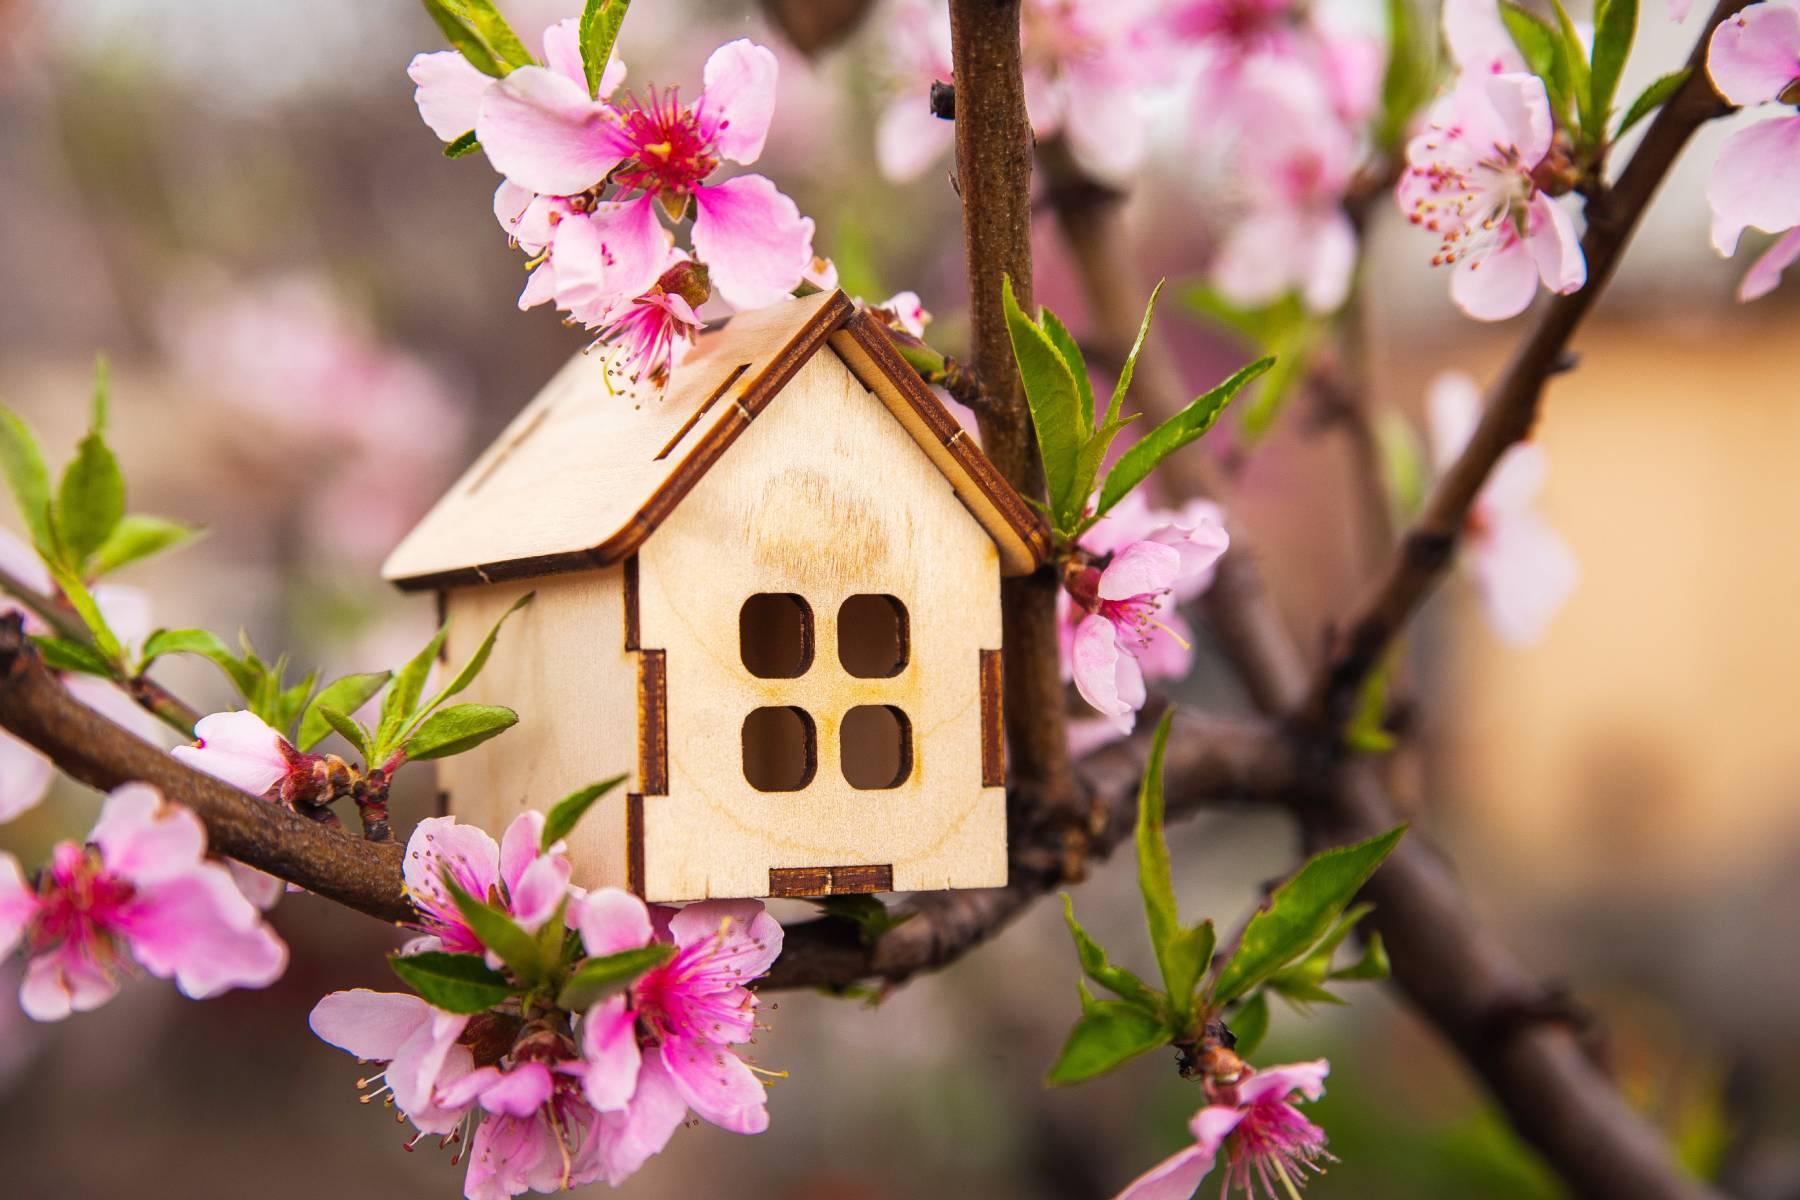 Records show busiest spring property market in 10 years